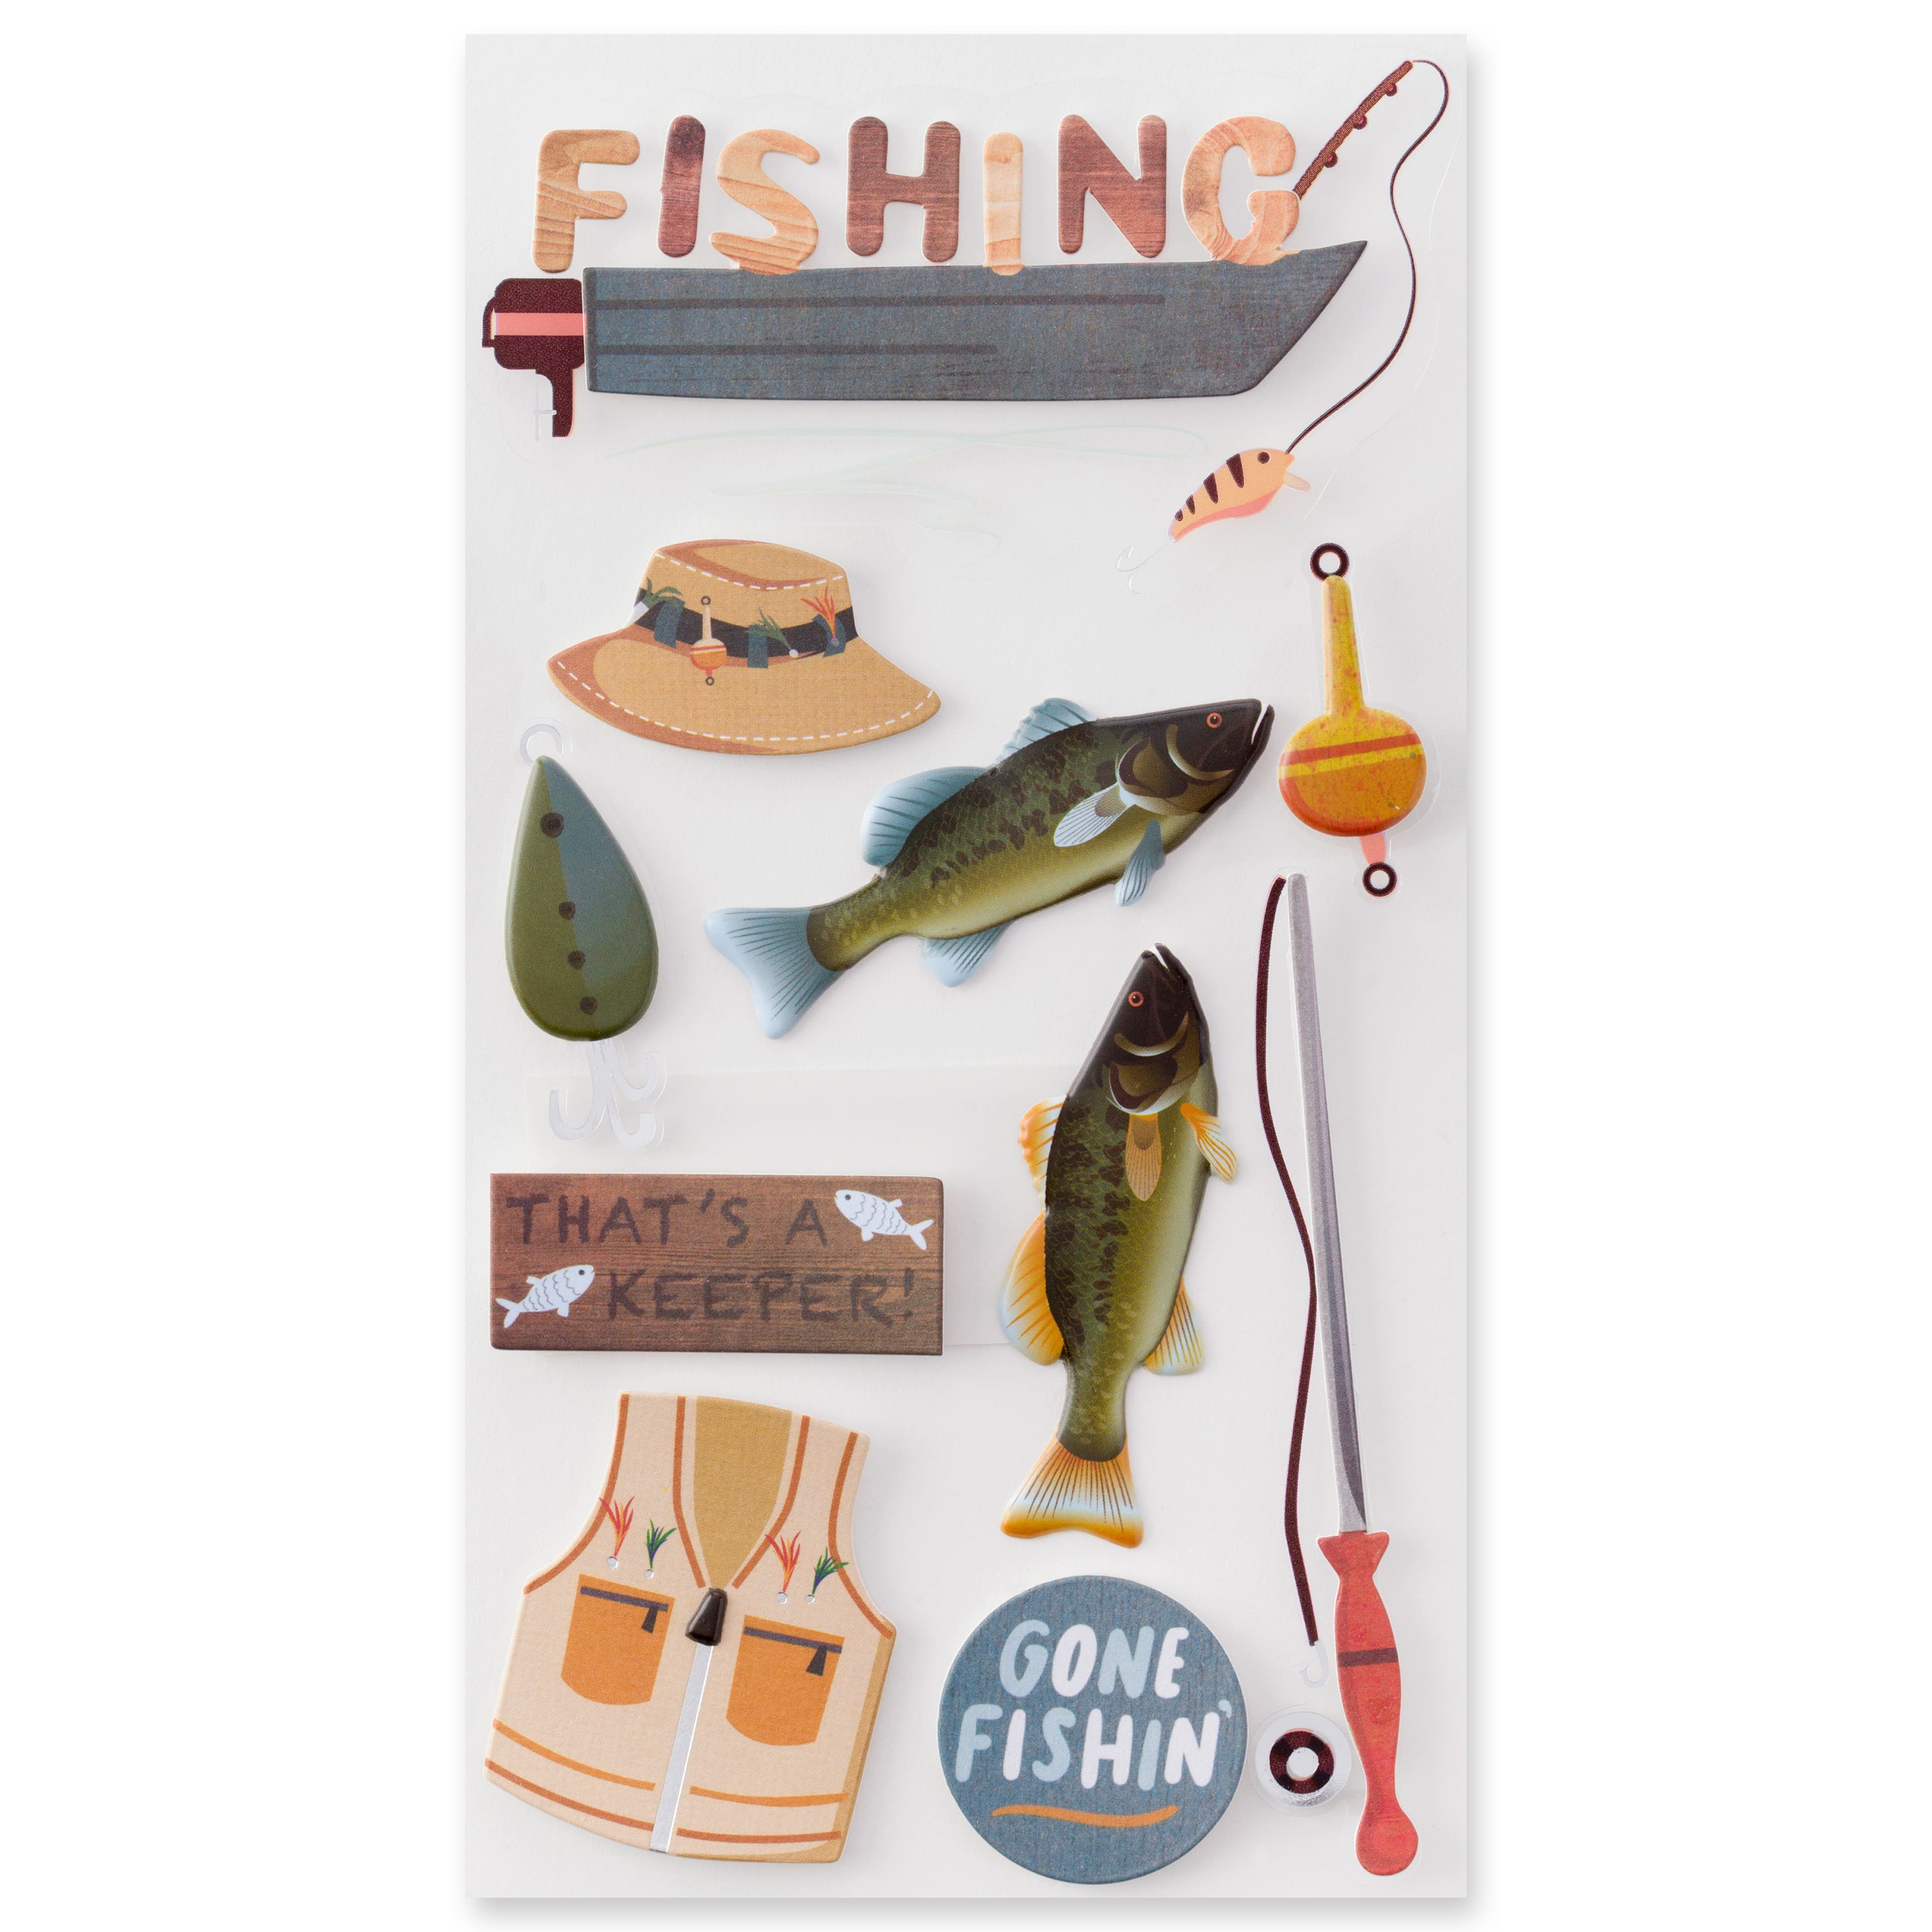 Fishing Stickers by Recollections&#x2122;